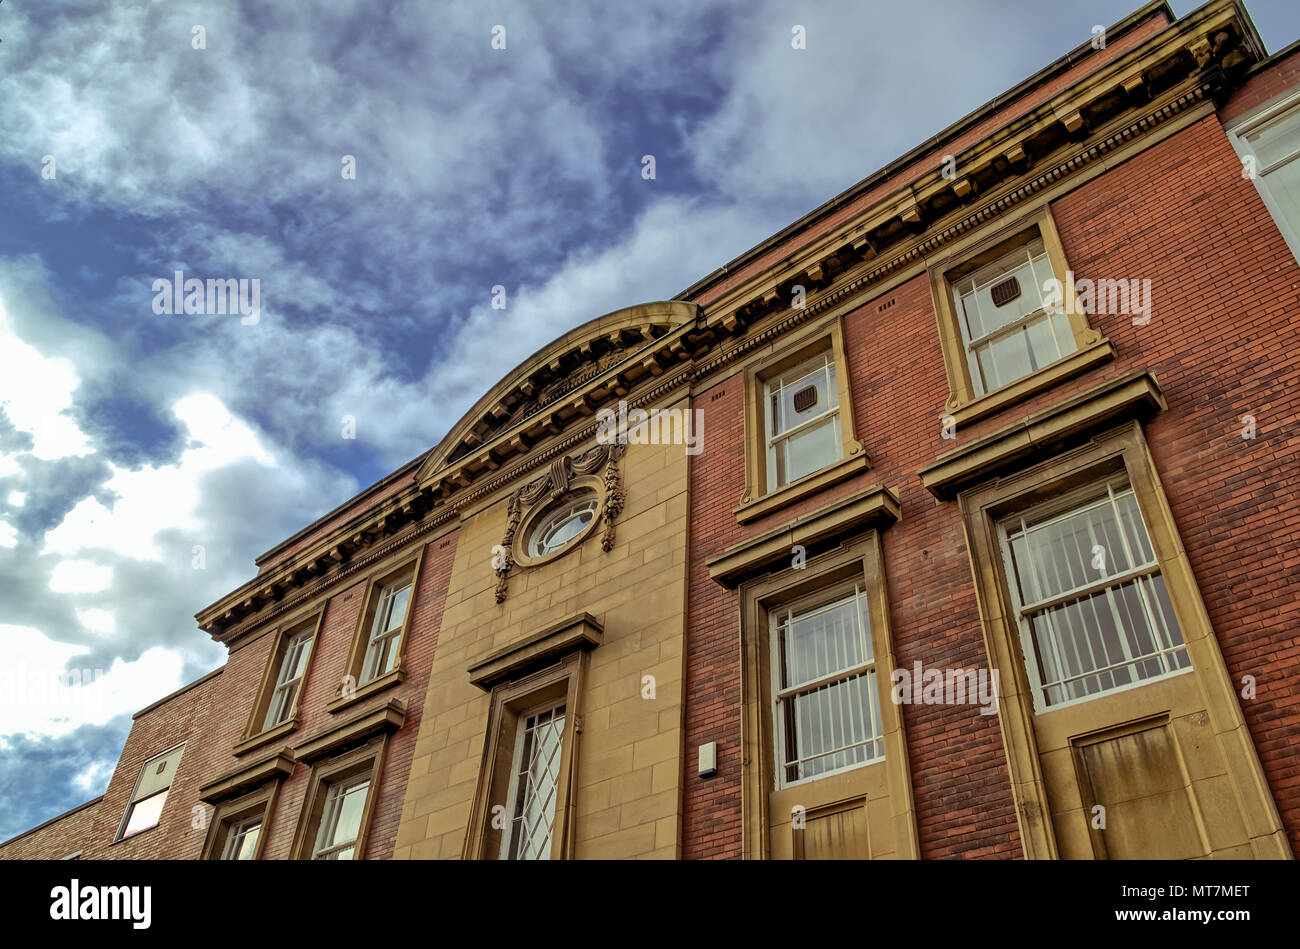 Traditional early twentieth century British municipal brick building (originally RRDC - Rotherham Rural District Council) with ornate architecture Stock Photo